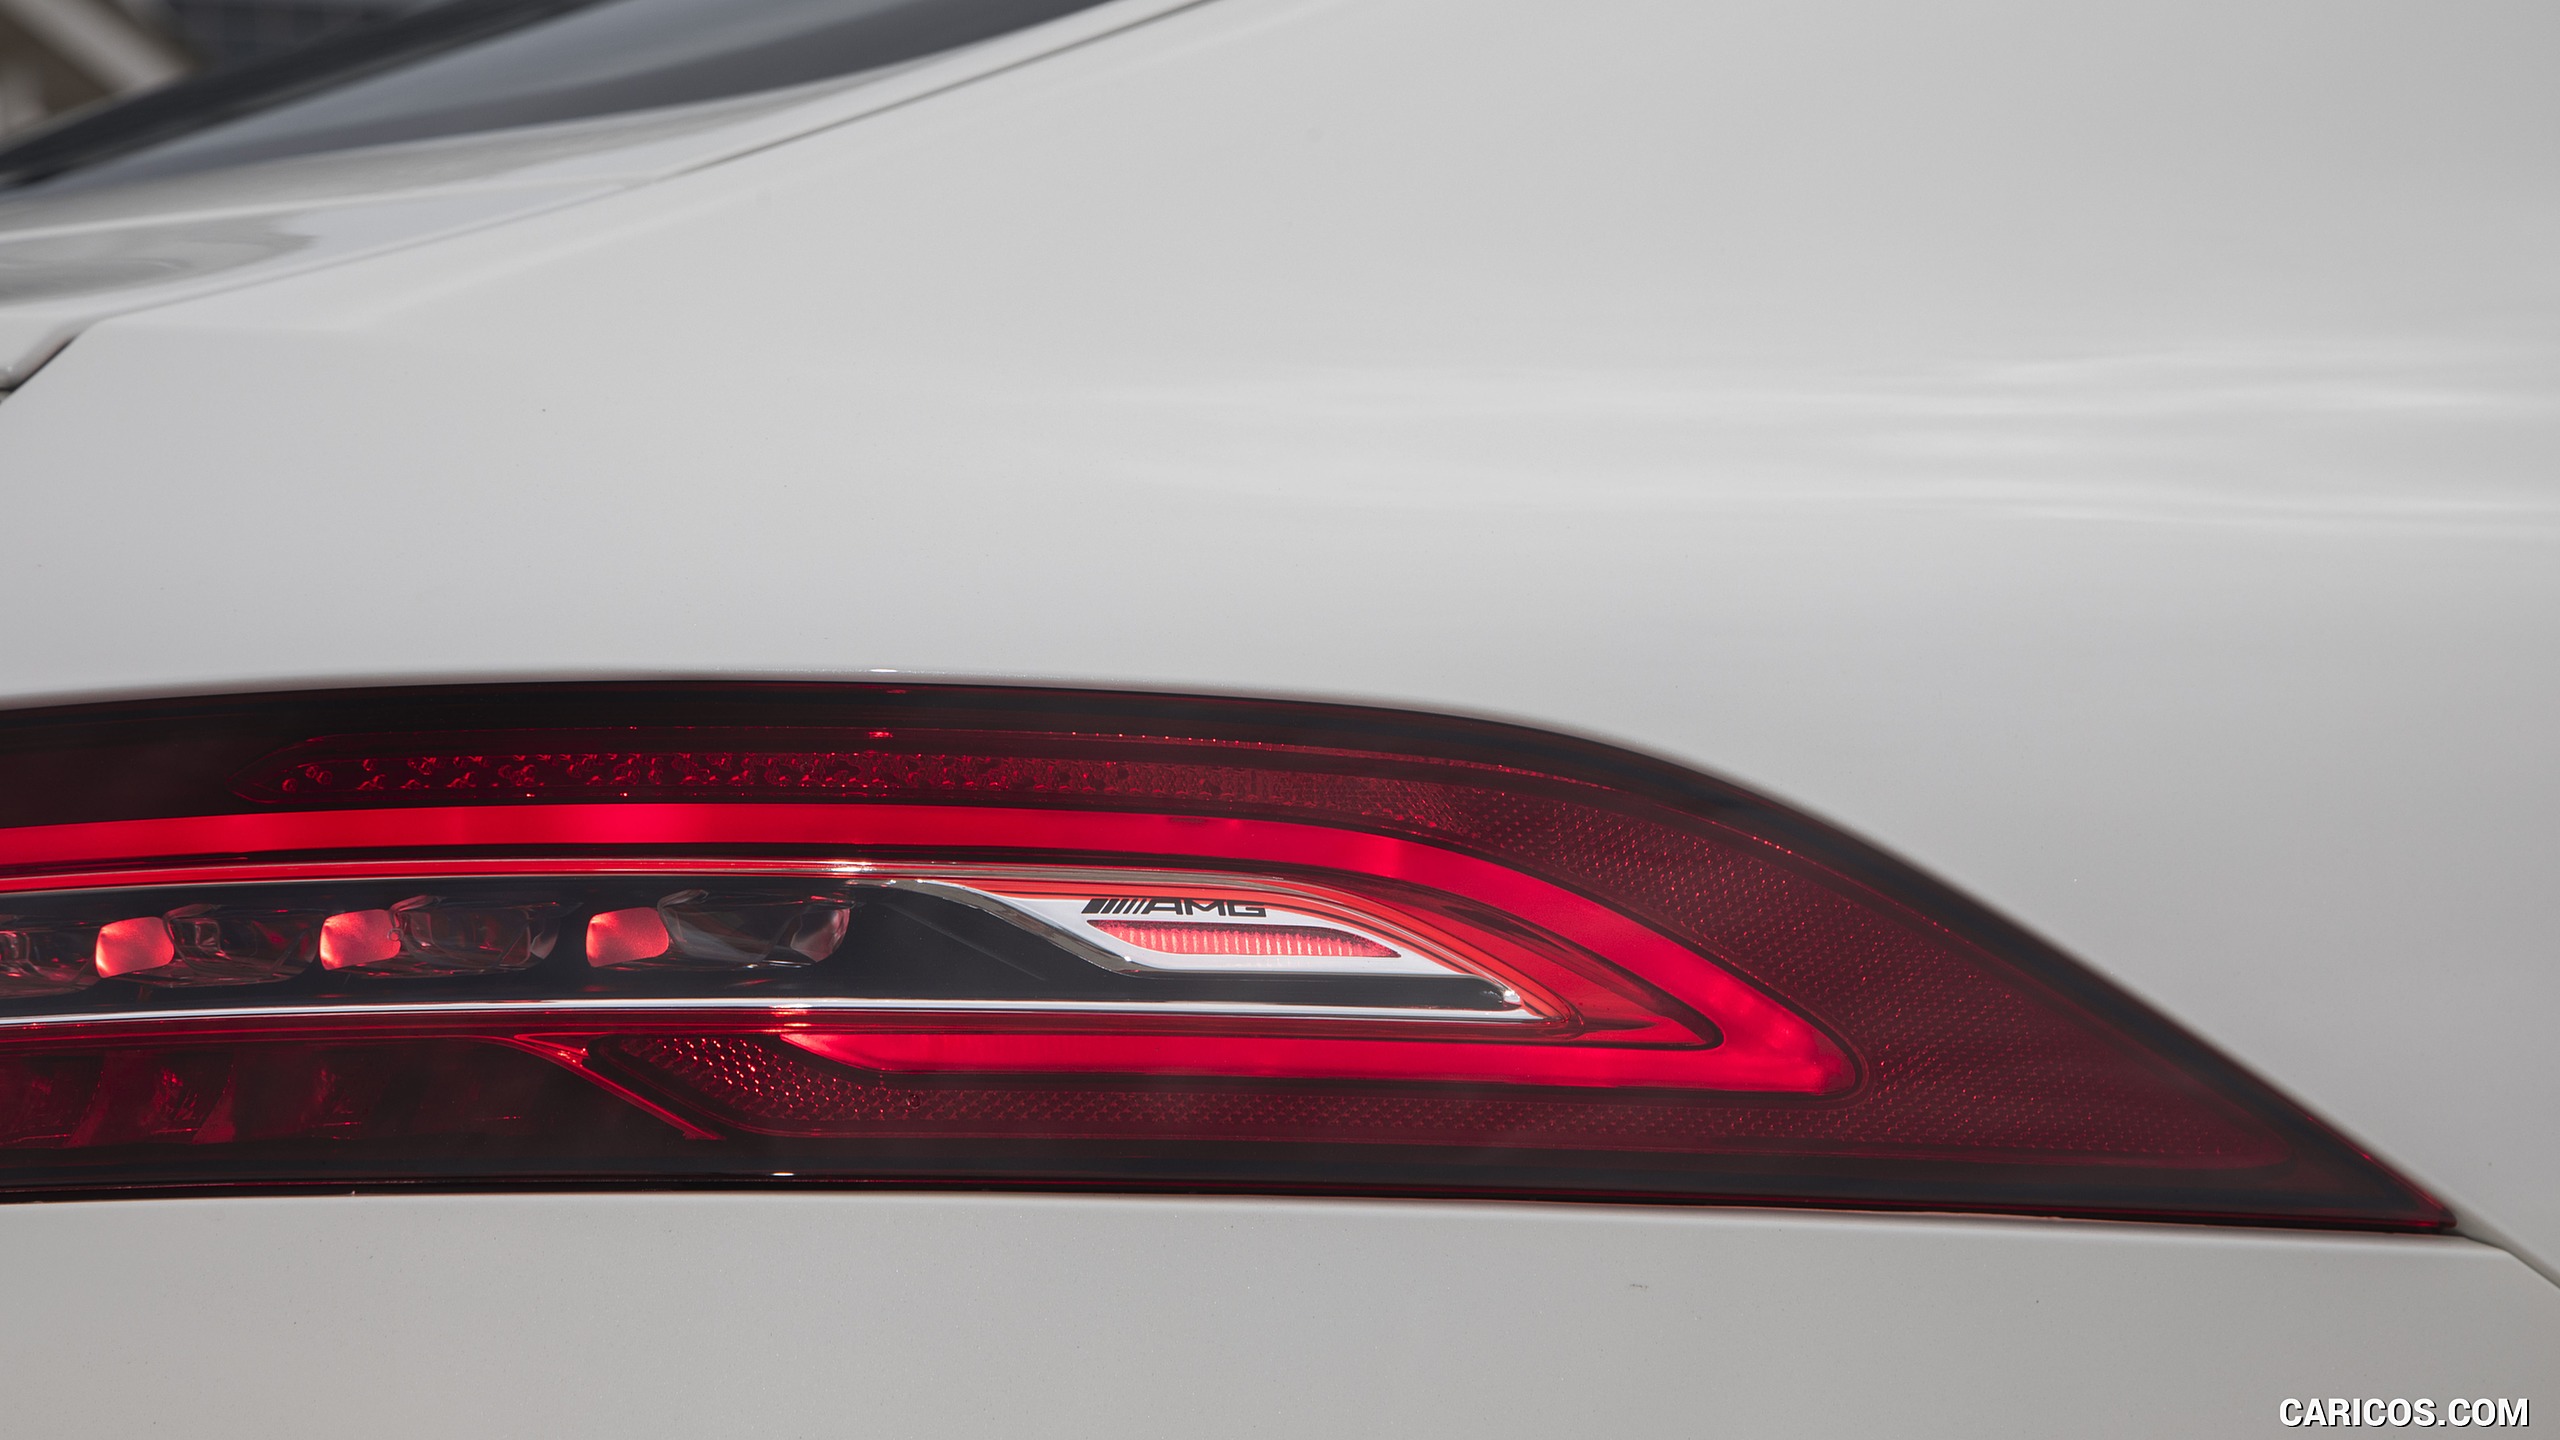 2019 Mercedes-AMG GT 53 4-Door Coupe (US-Spec) - Tail Light, #341 of 427